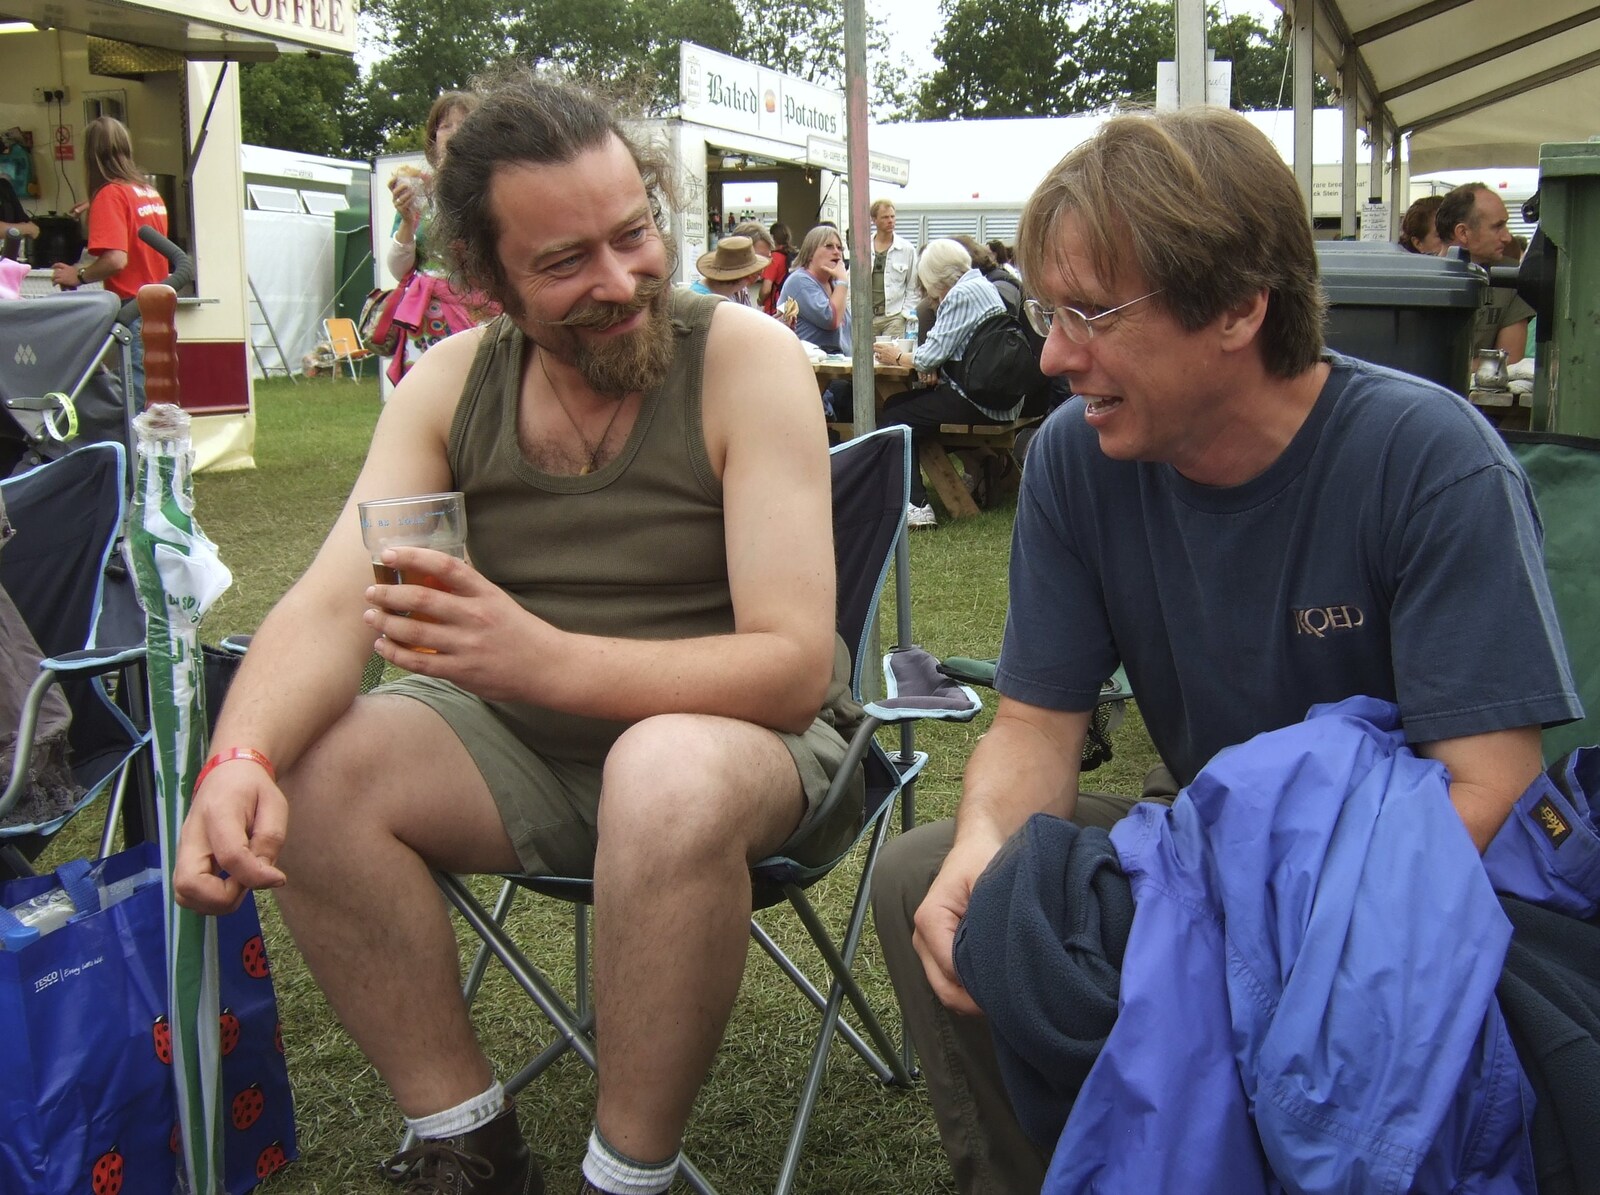 Noddy chats to Dan from Qualcomm in California from The Cambridge Folk Festival, Cherry Hinton Hall, Cambridge - 1st August 2009